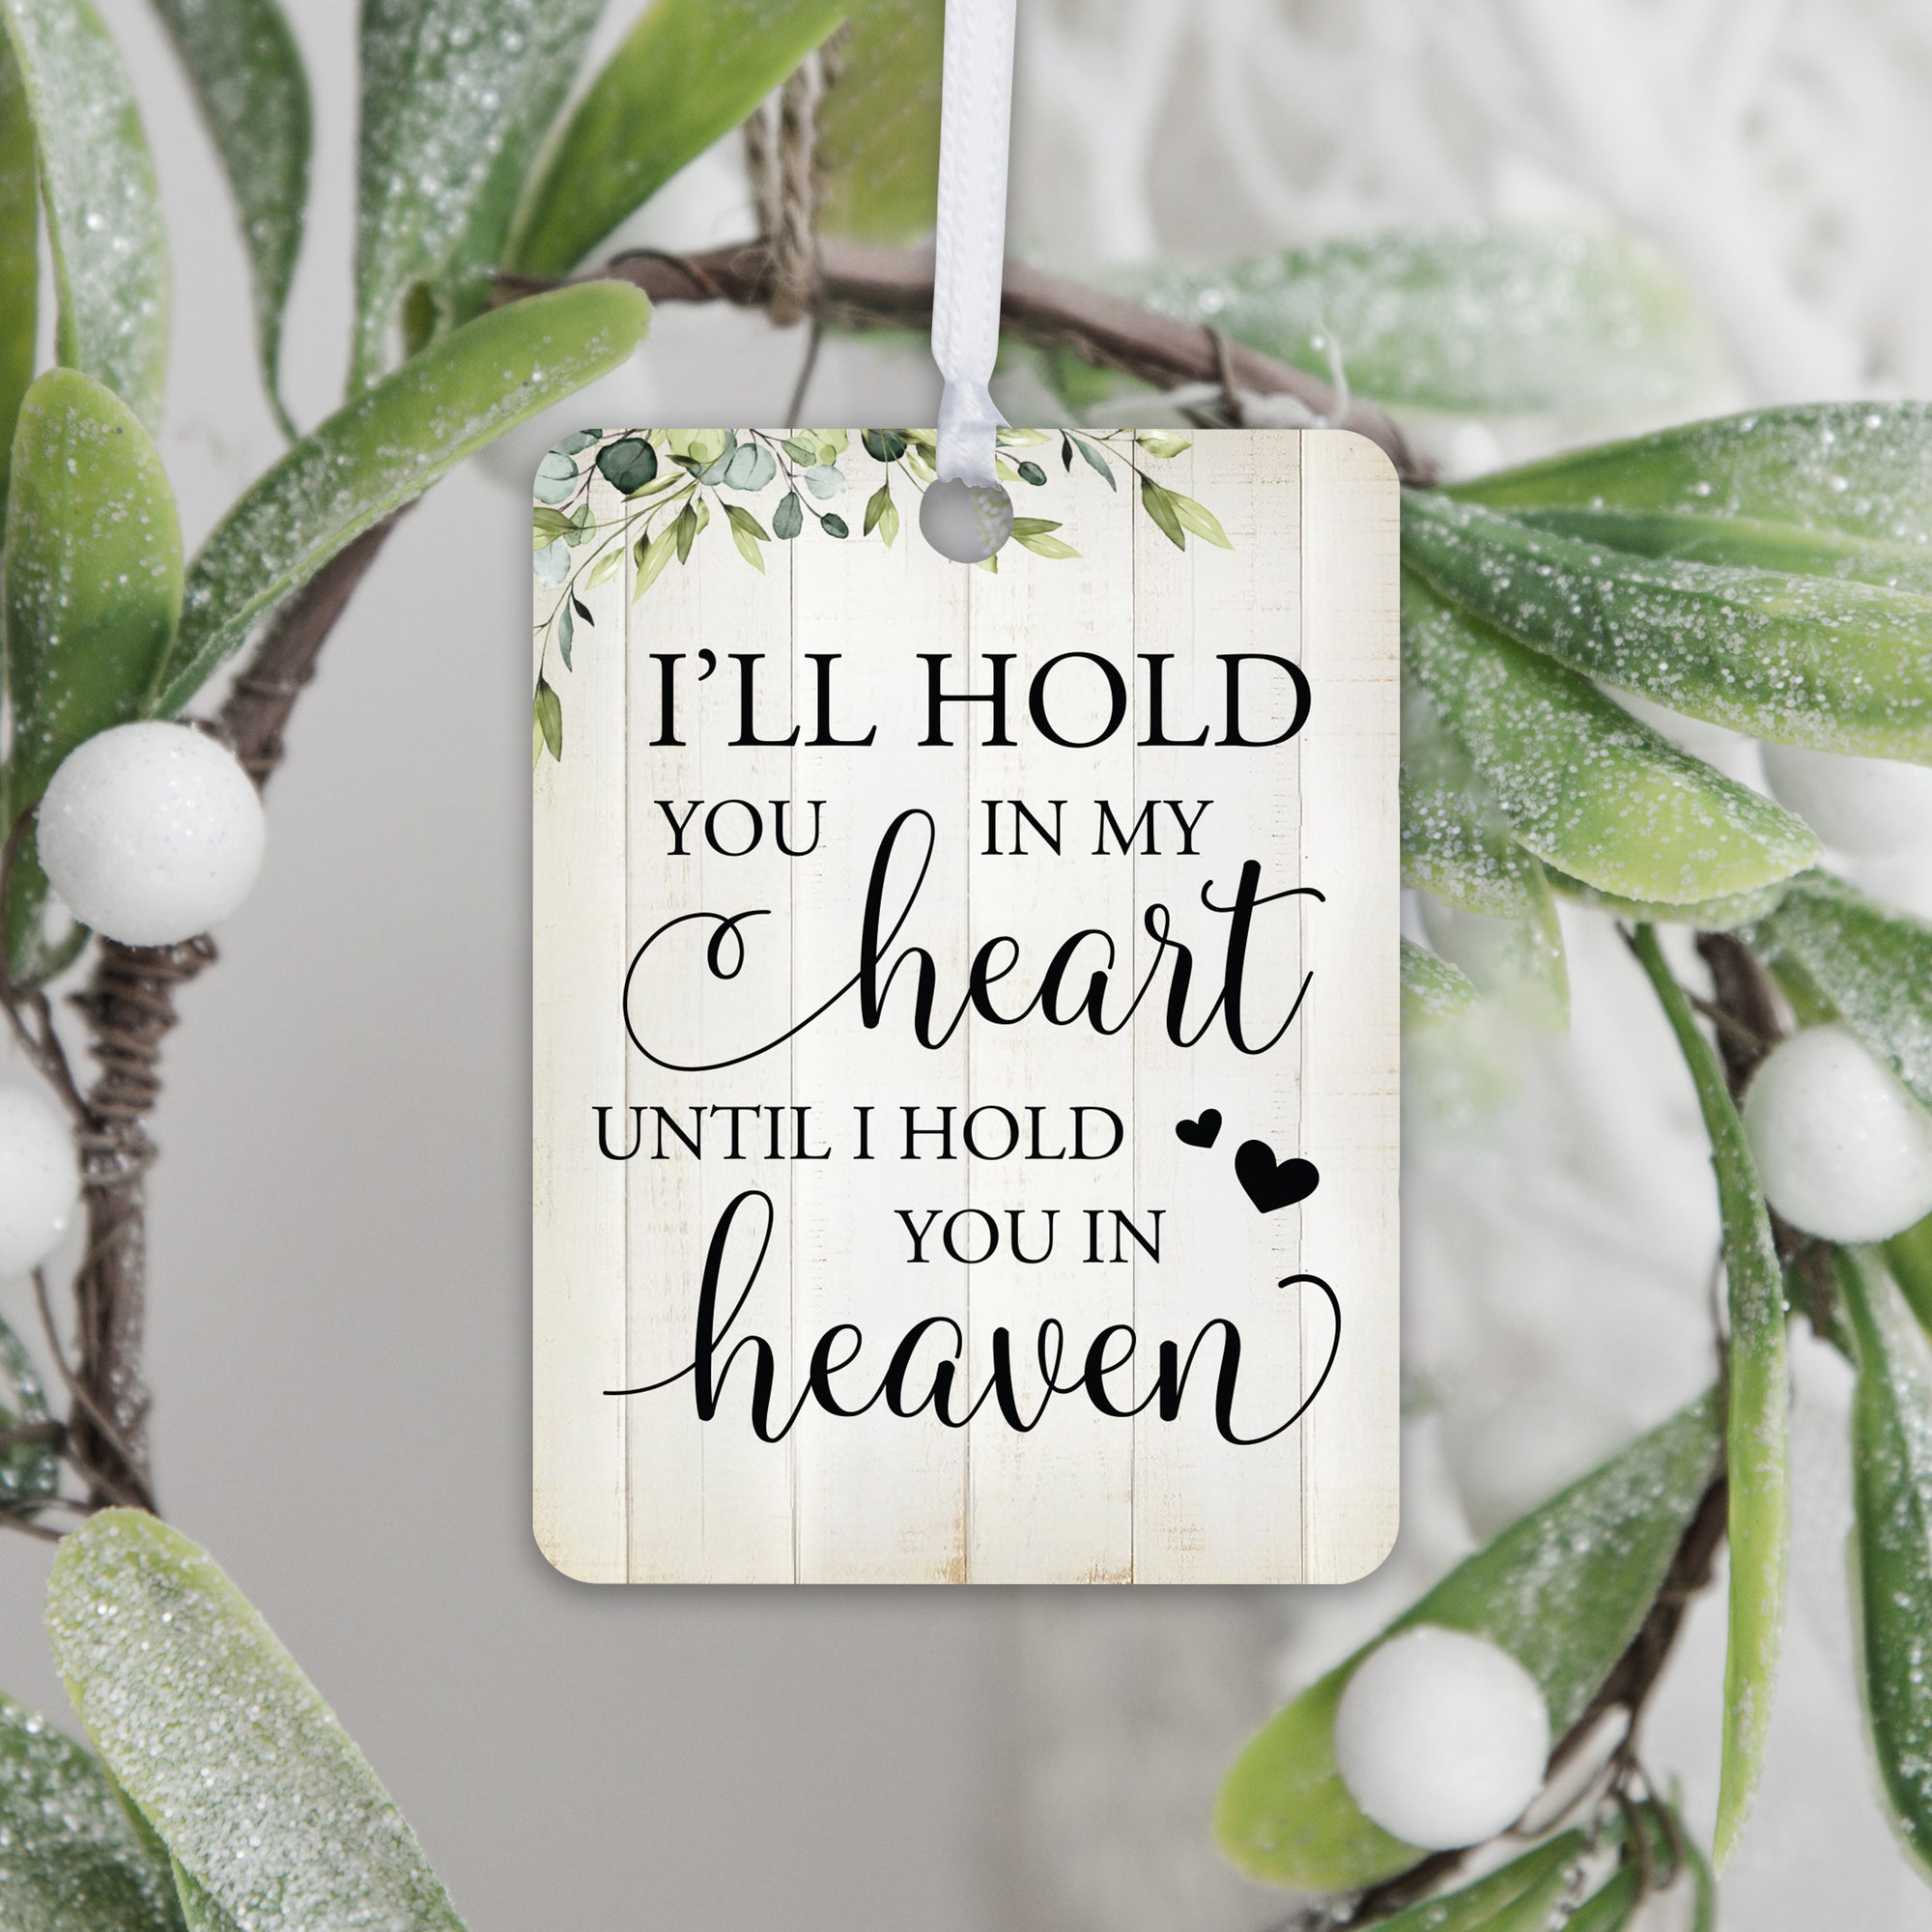 Lifesong Milestones Hanging Memorial Vertical Ornament for Loss of Loved One